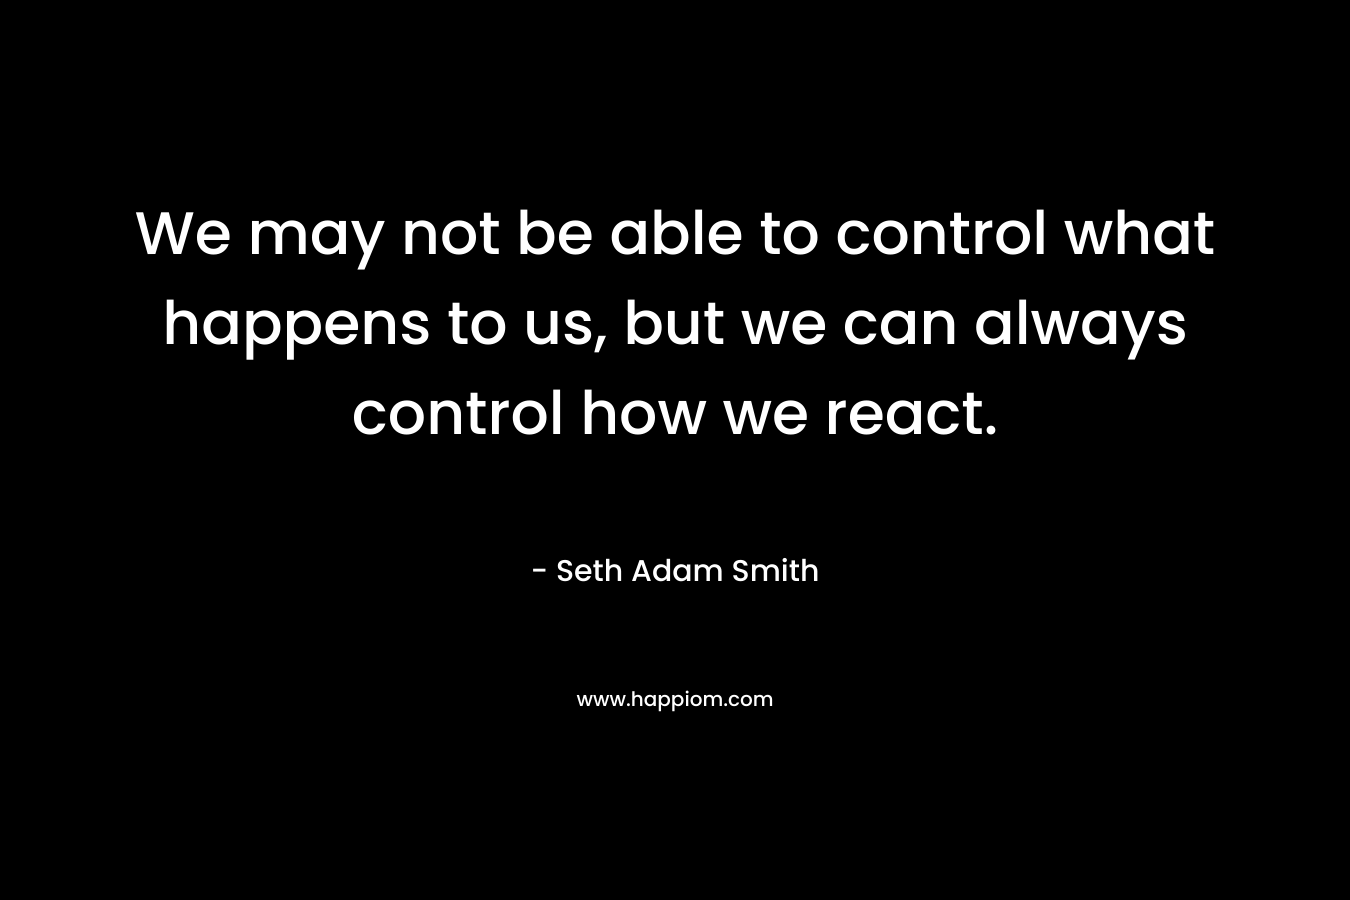 We may not be able to control what happens to us, but we can always control how we react. – Seth Adam Smith